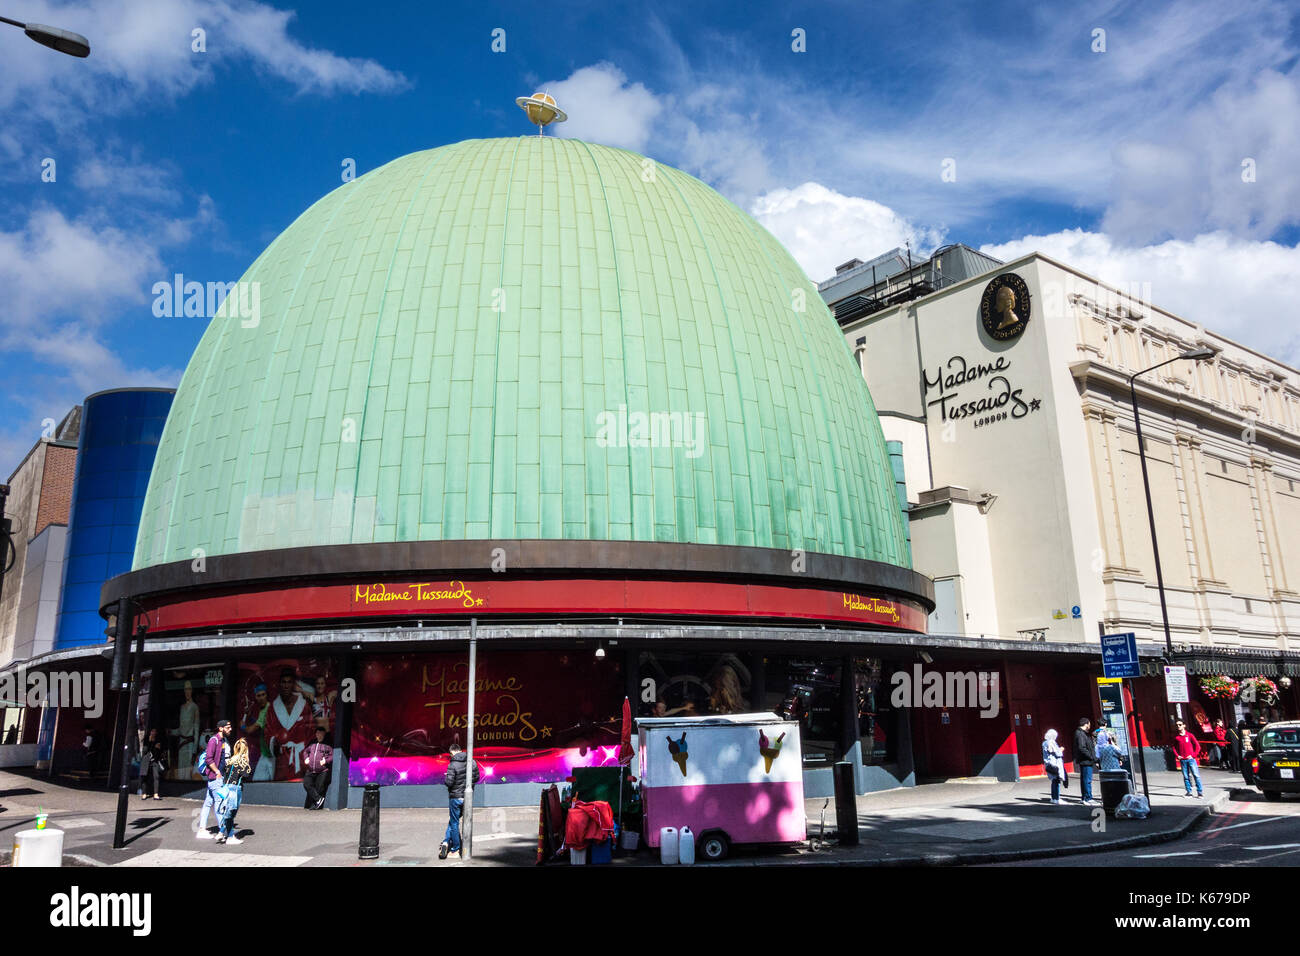 The dome of the former and now-defunct London Planetarium on Marylebone Road, London, UK Stock Photo